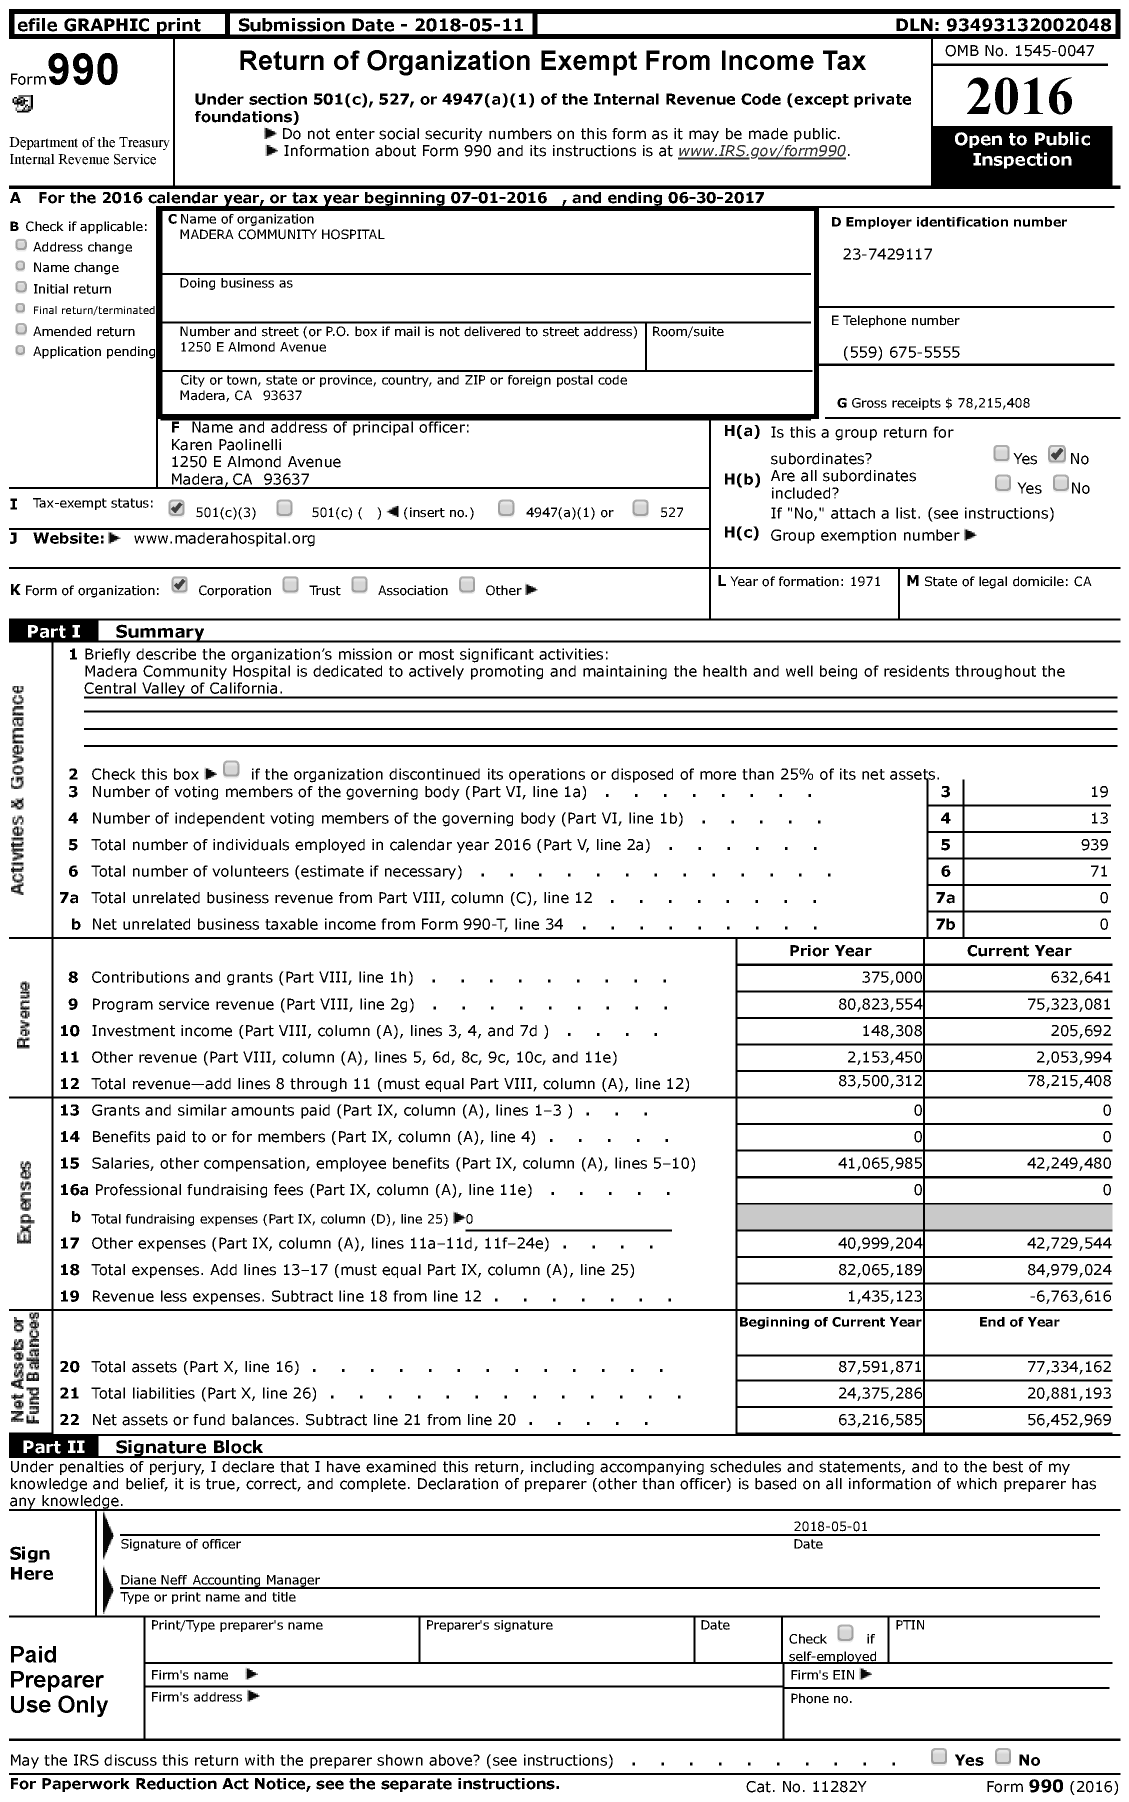 Image of first page of 2016 Form 990 for Madera Community Hospital (MCH)